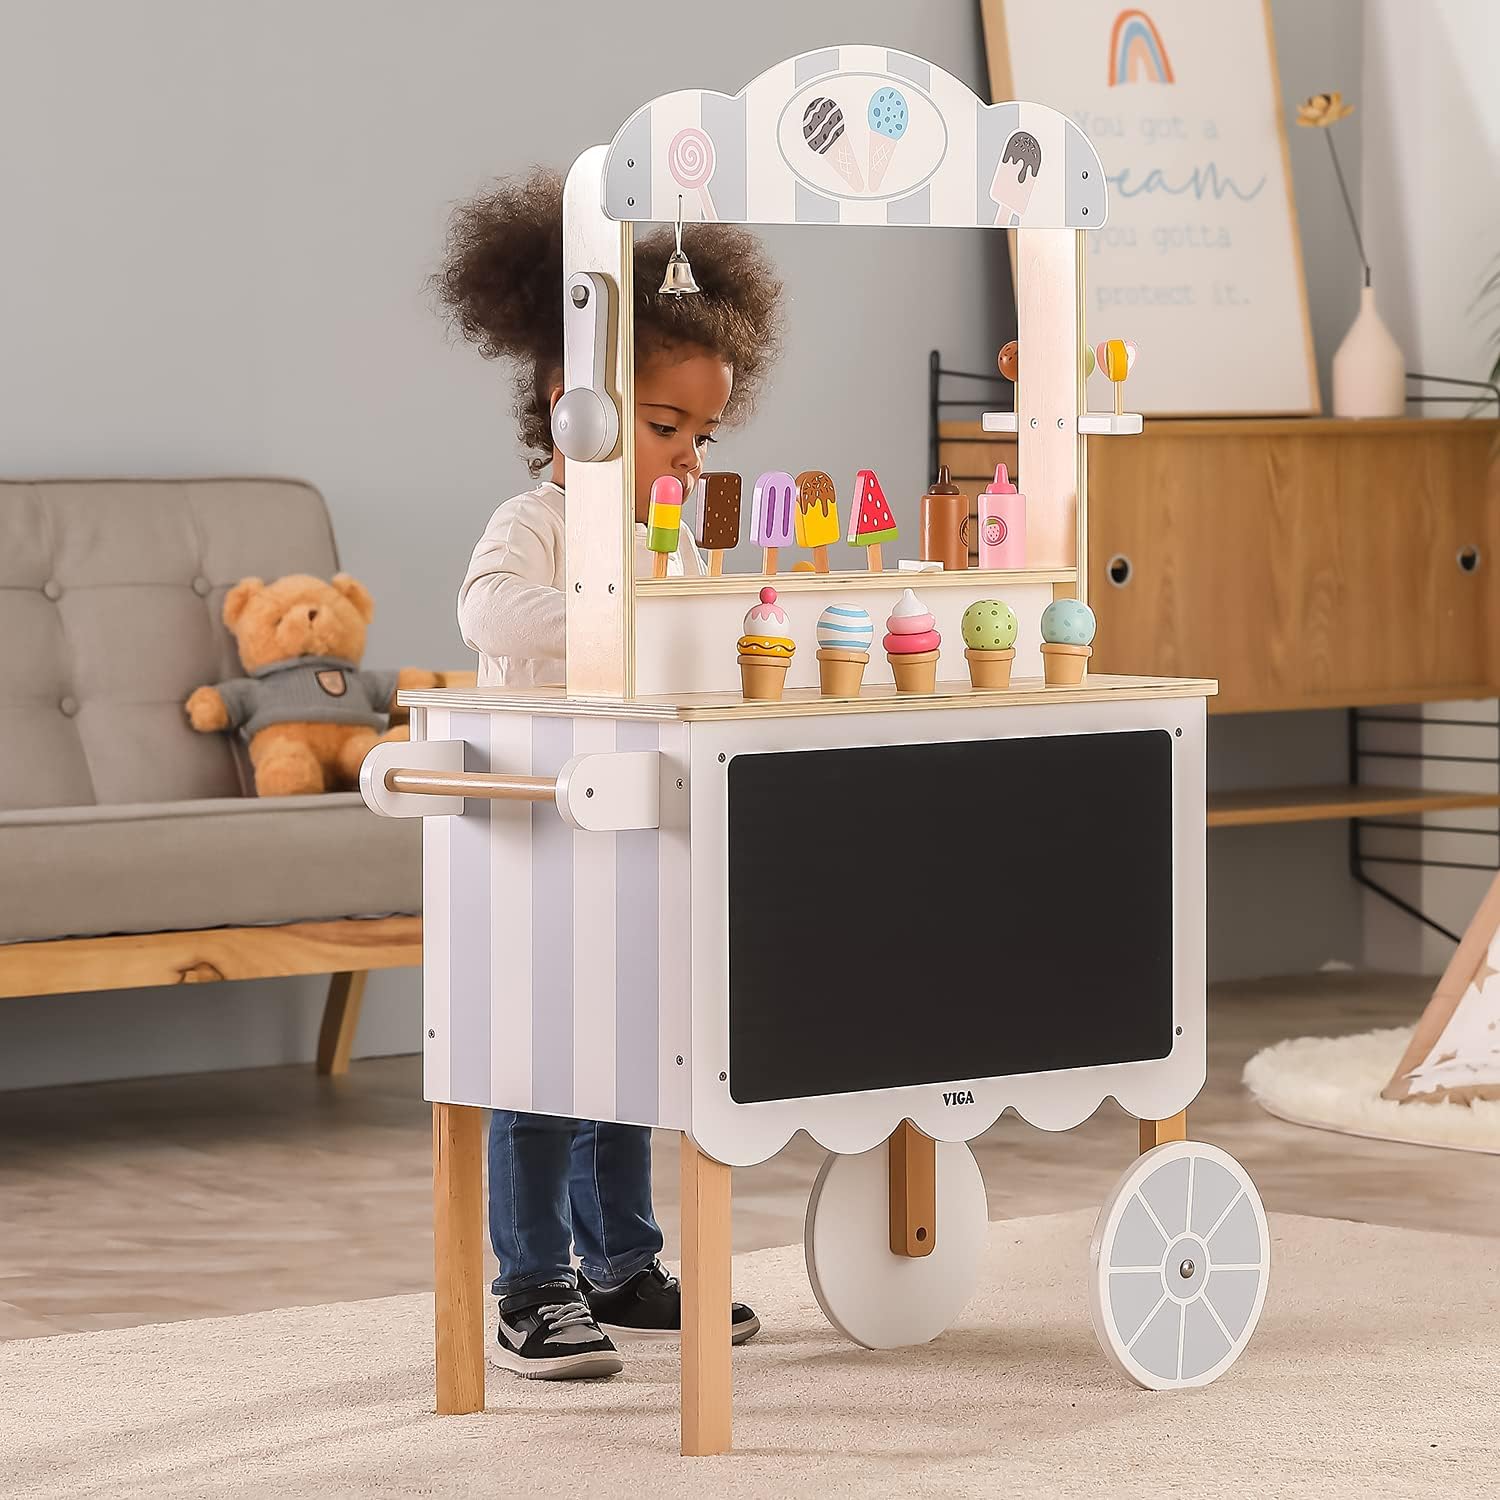 Mobile Ice Cream Shop, Give your child the ultimate ice cream experience with this Mobile Ice Cream Shop.This Mobile Ice Cream Shop set includes colourful ice cream cones, ice-lollies, lollipops, and utensils for a realistic ice-cream trolley experience! The ice cream ball can be matched at will, making it perfect for customizing each ice cream cone to your child's liking. Our ice cream scoop is attached with a magnet which can attract the ice cream ball and put it on the cone with ease, just like a real ic